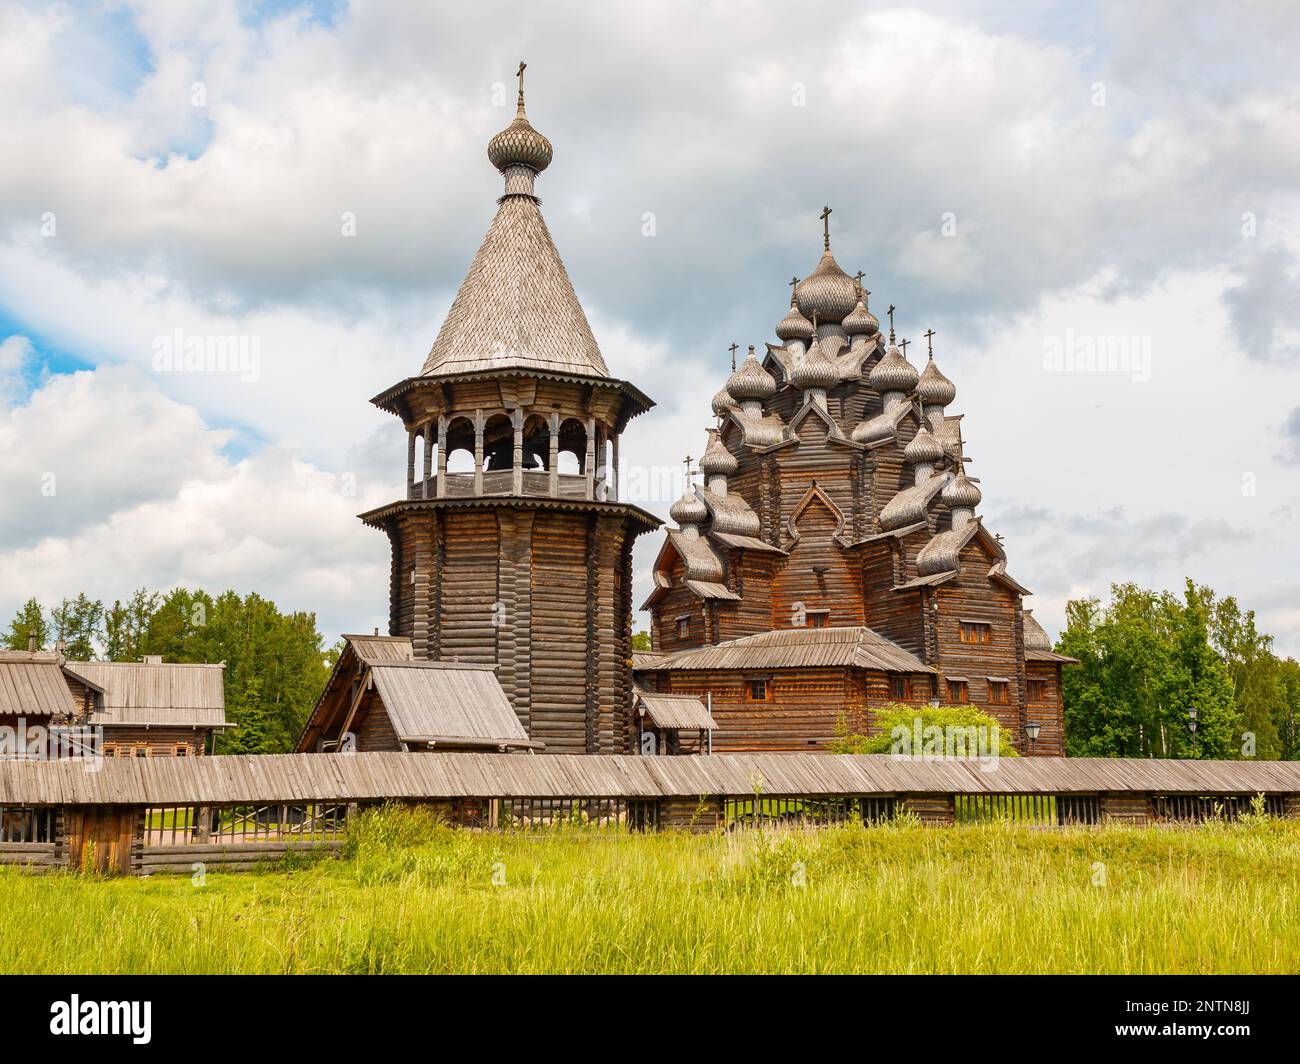 The Ethnographic Museum of Russian Wooden Architecture Bogoslovka Estate is located in the Nevsky forest park of the Leningrad region near St. Petersb Stock Photo